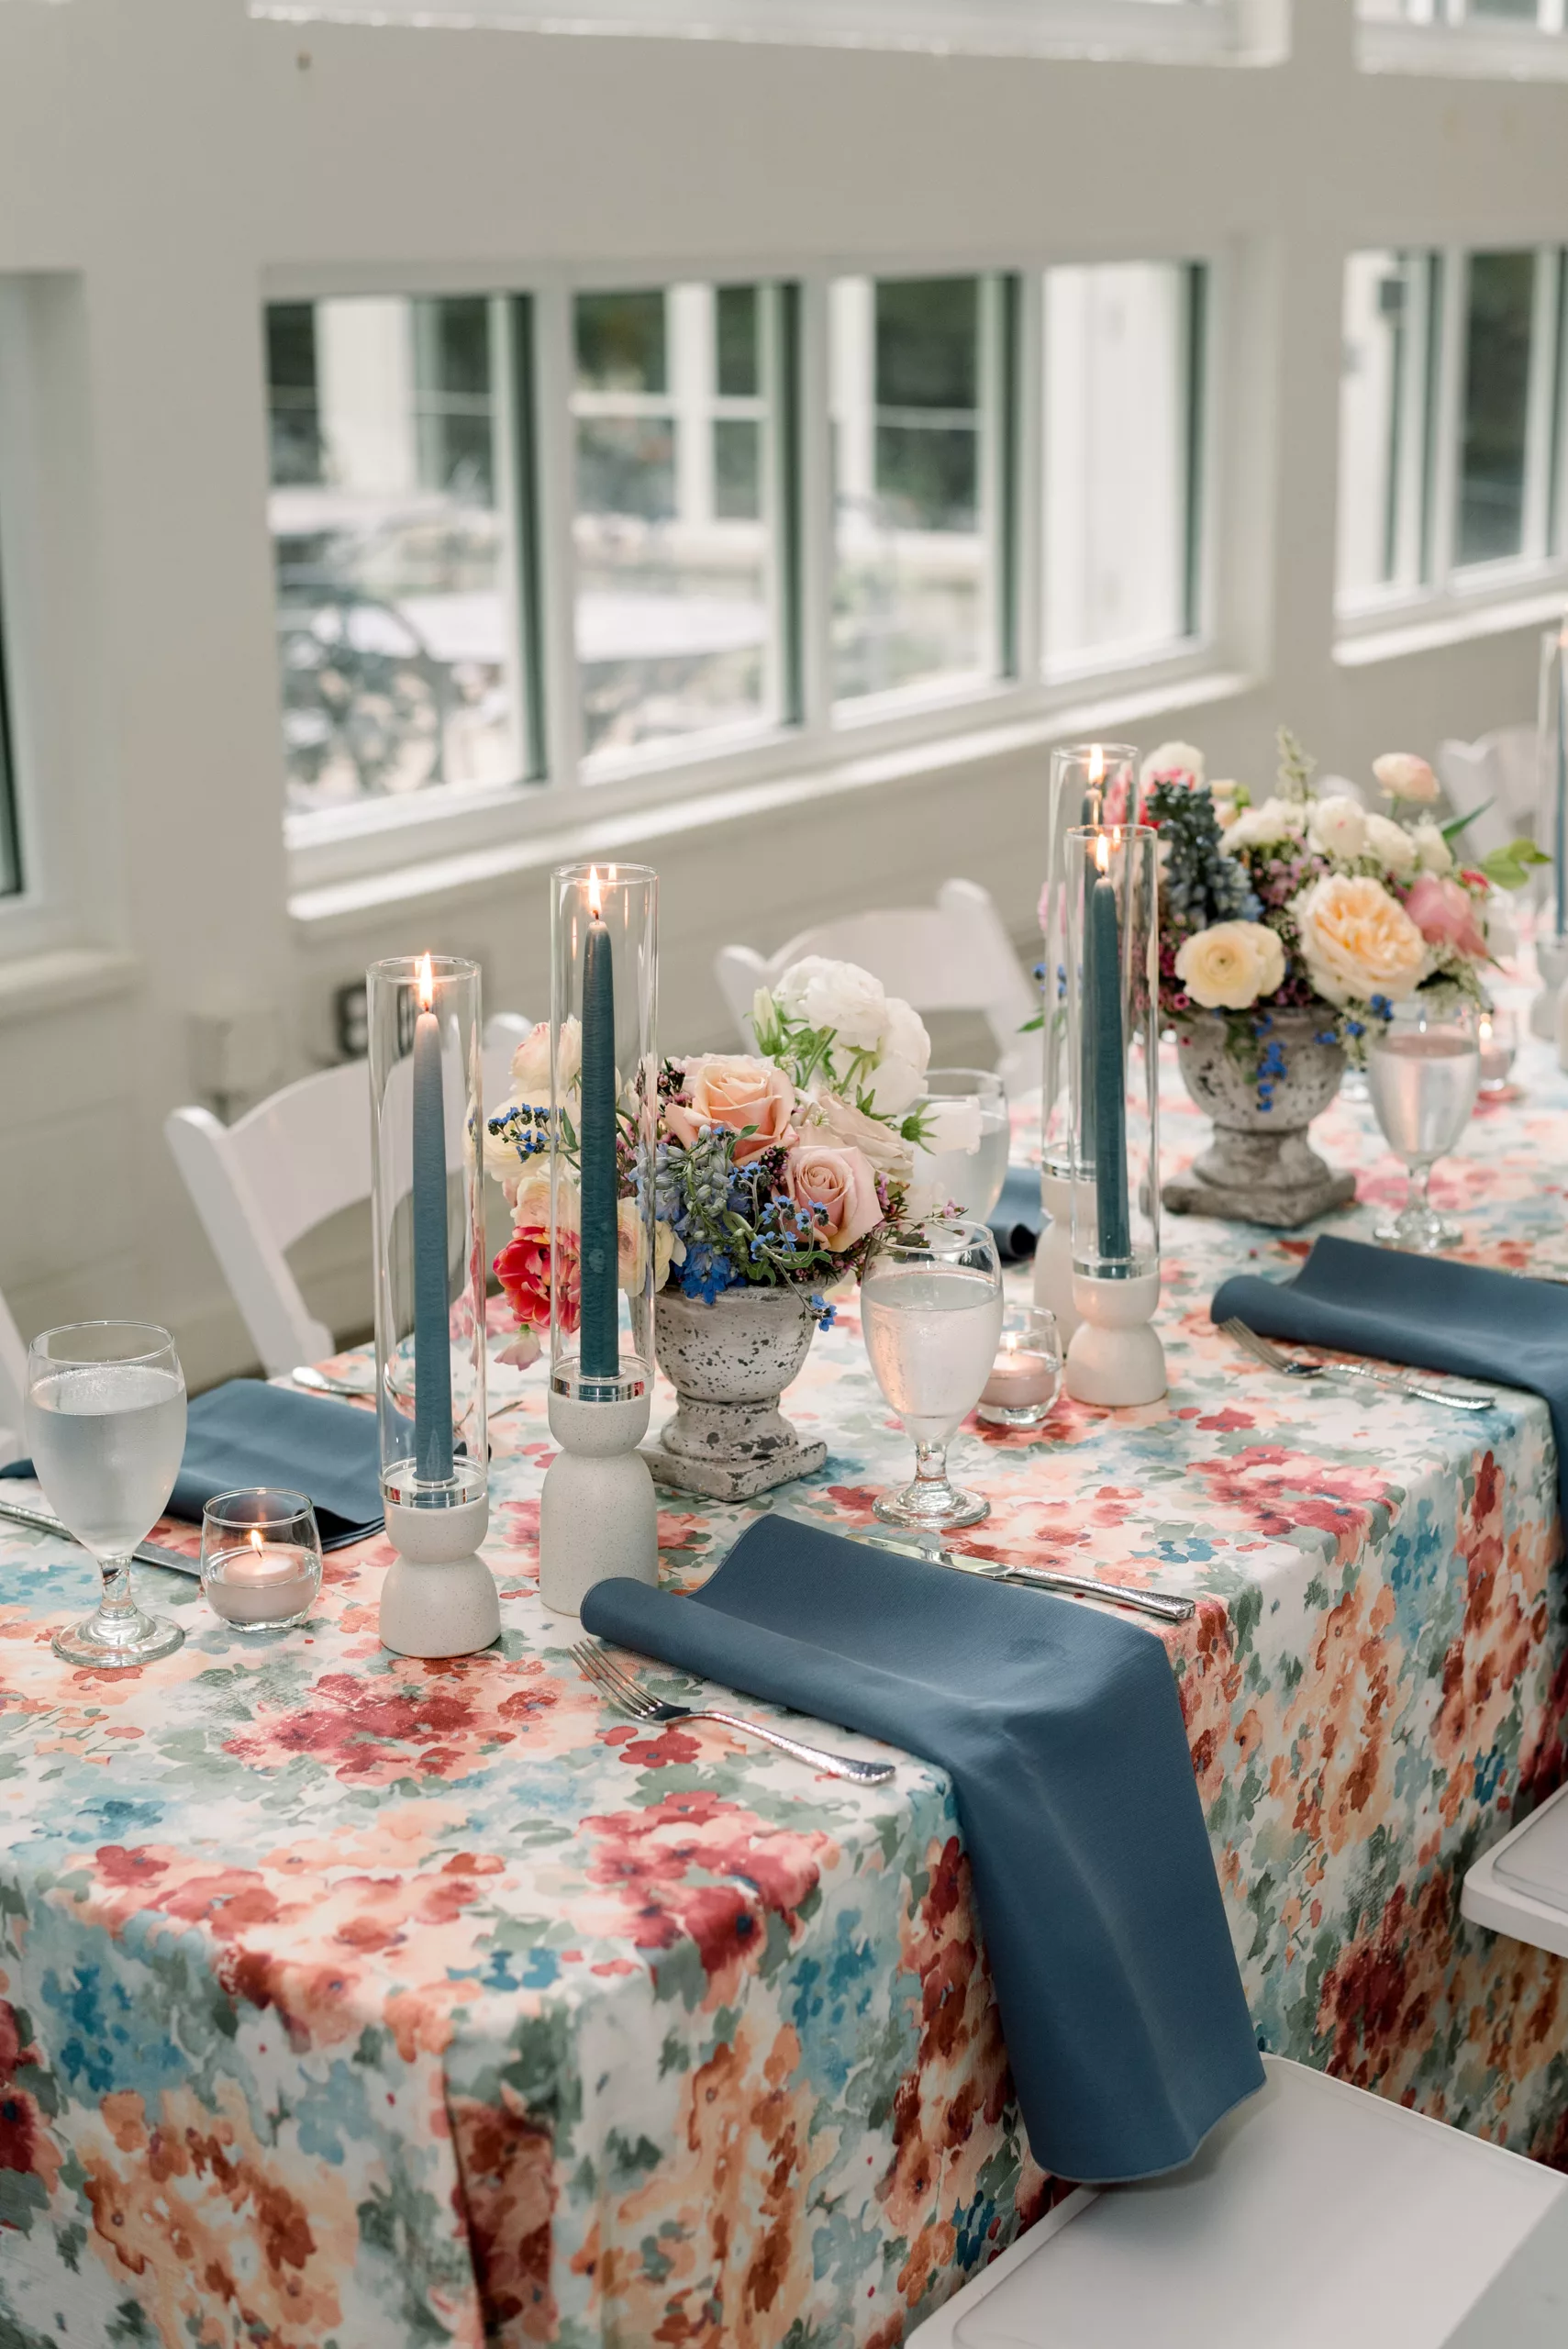 Details of a table setting with floral linen tablecloth and matching blue napkins and candles